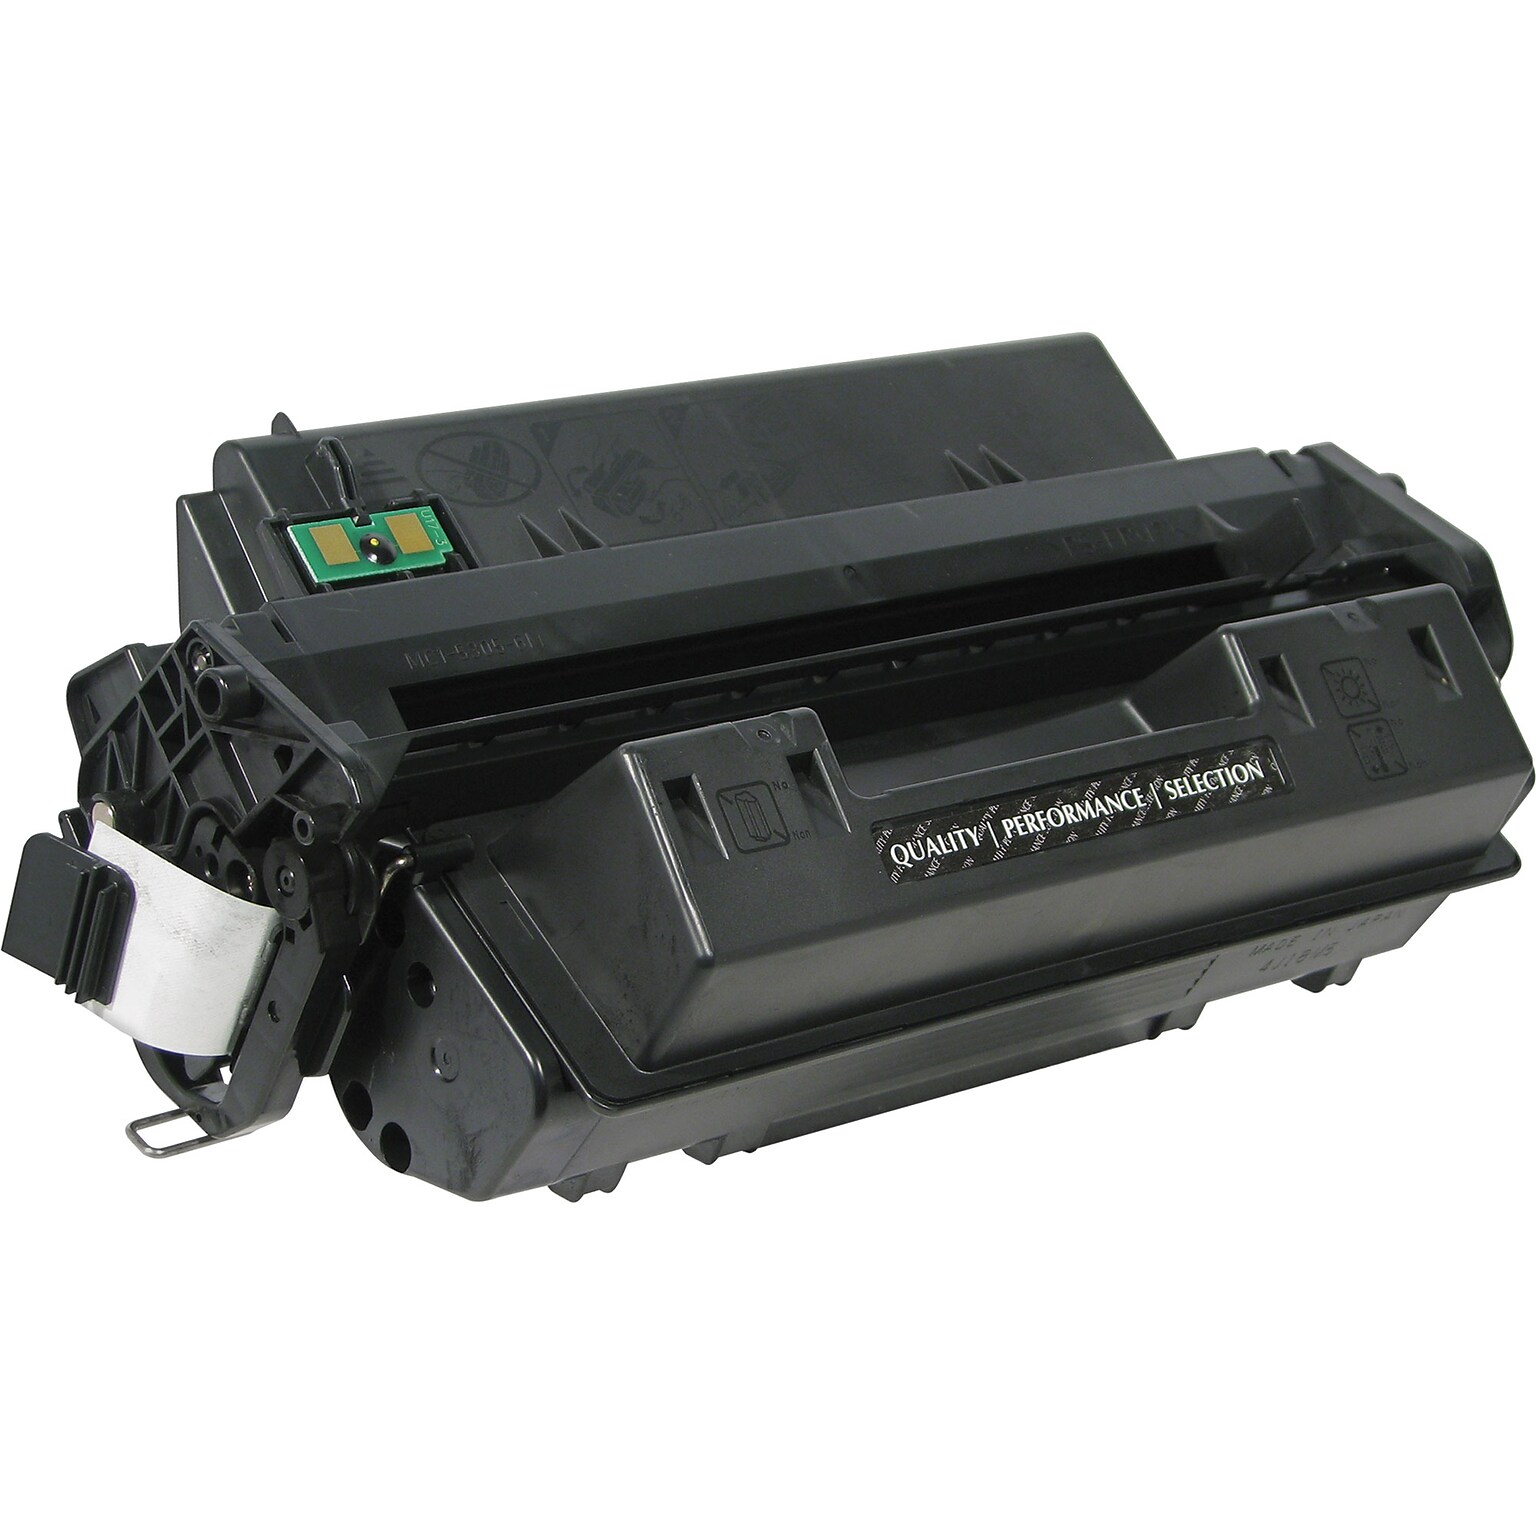 Quill Brand Remanufactured HP 10A (Q2610A) Black Extra High Yield Laser Toner Cartridge (100% Satisfaction Guaranteed)